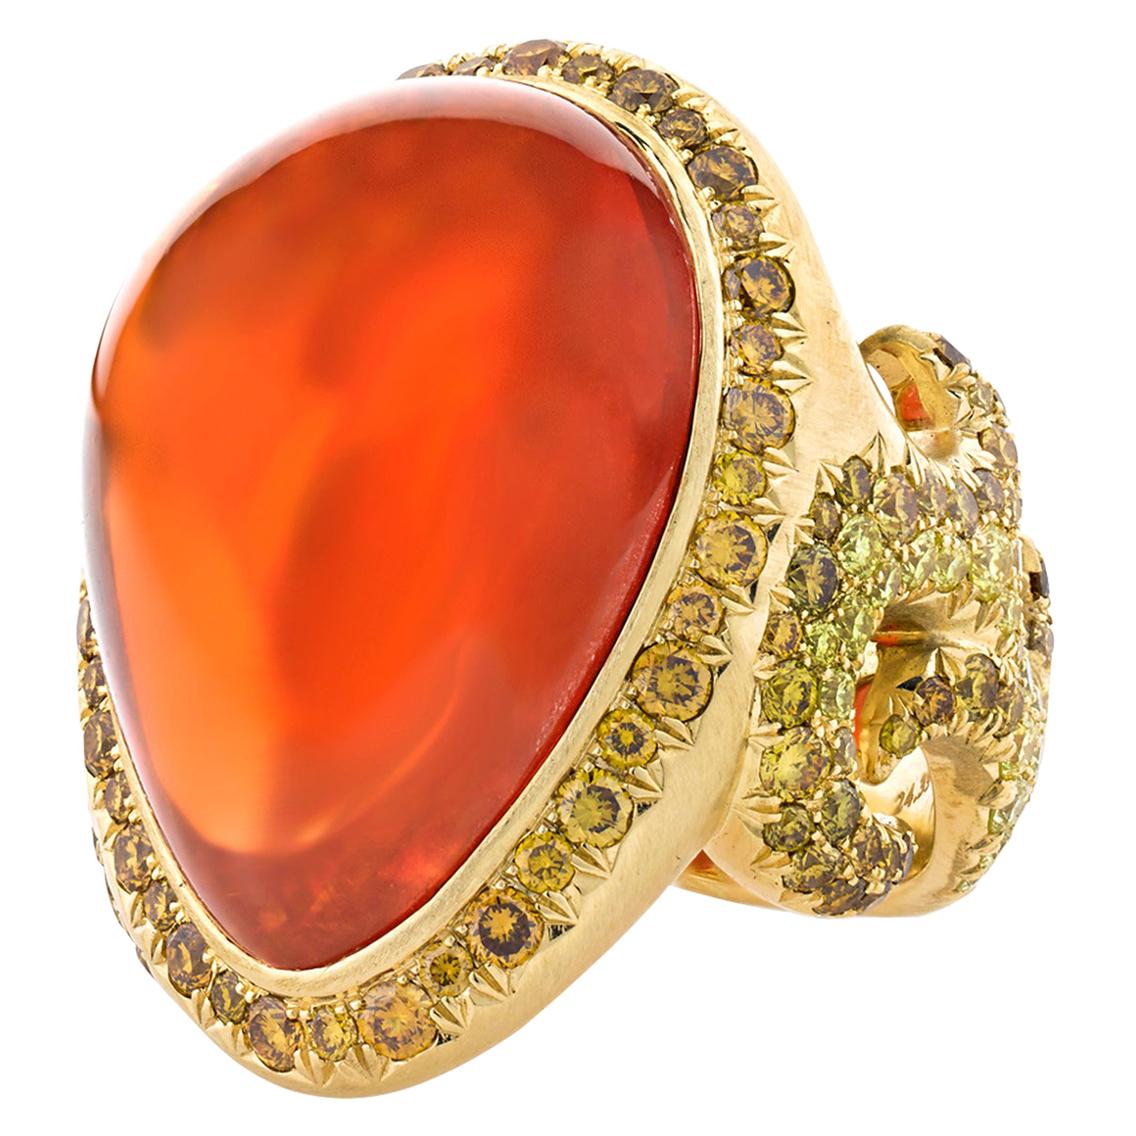 Fire Opal and Melee Diamond Filigree Ring, 24.39 Carat